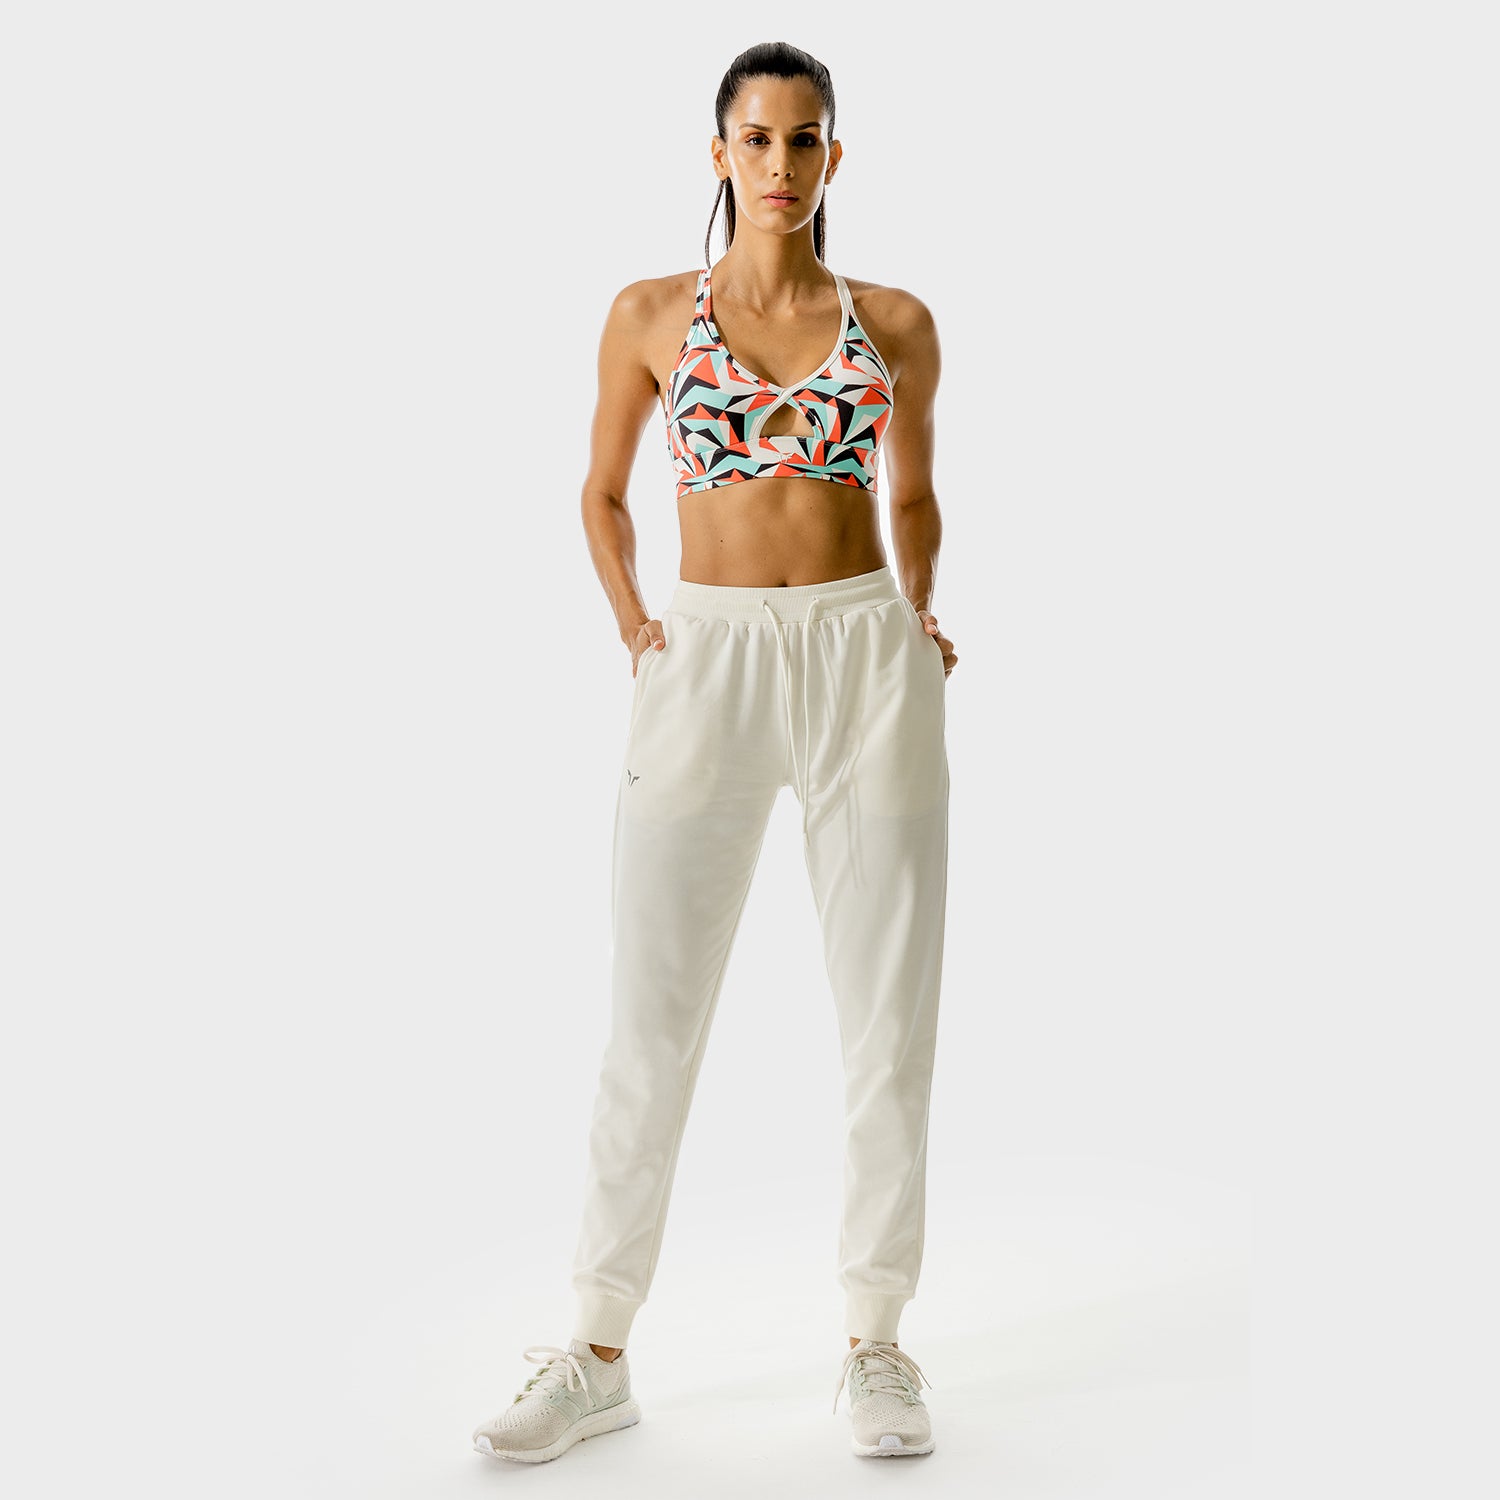 squatwolf-gym-pants-for-women-lab-joggers-whisper-white-workout-clothes